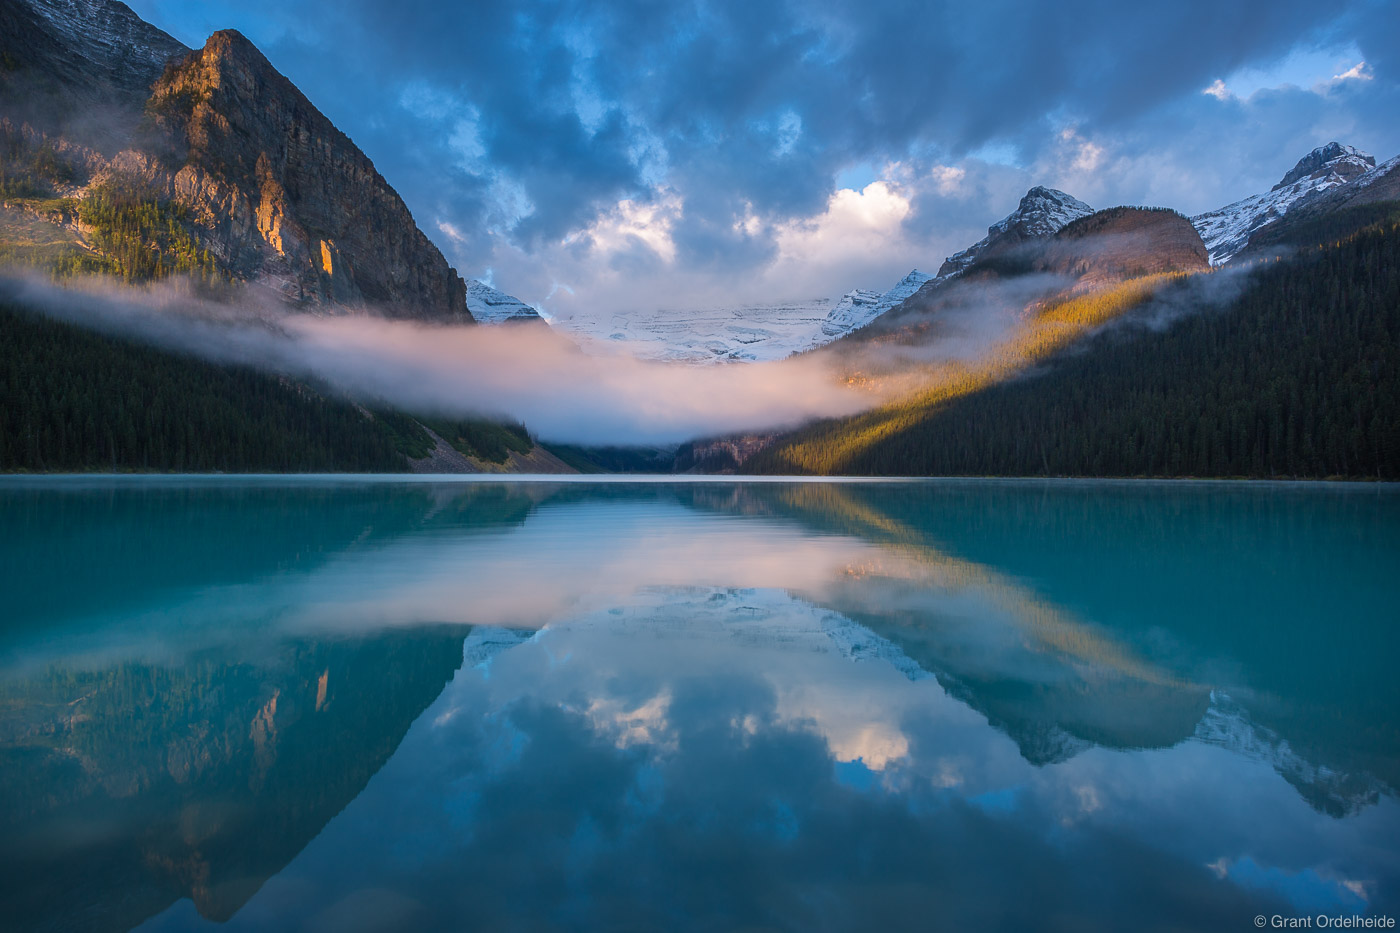 A foggy morning at the iconic Lake Louise in Alberta, Canada.